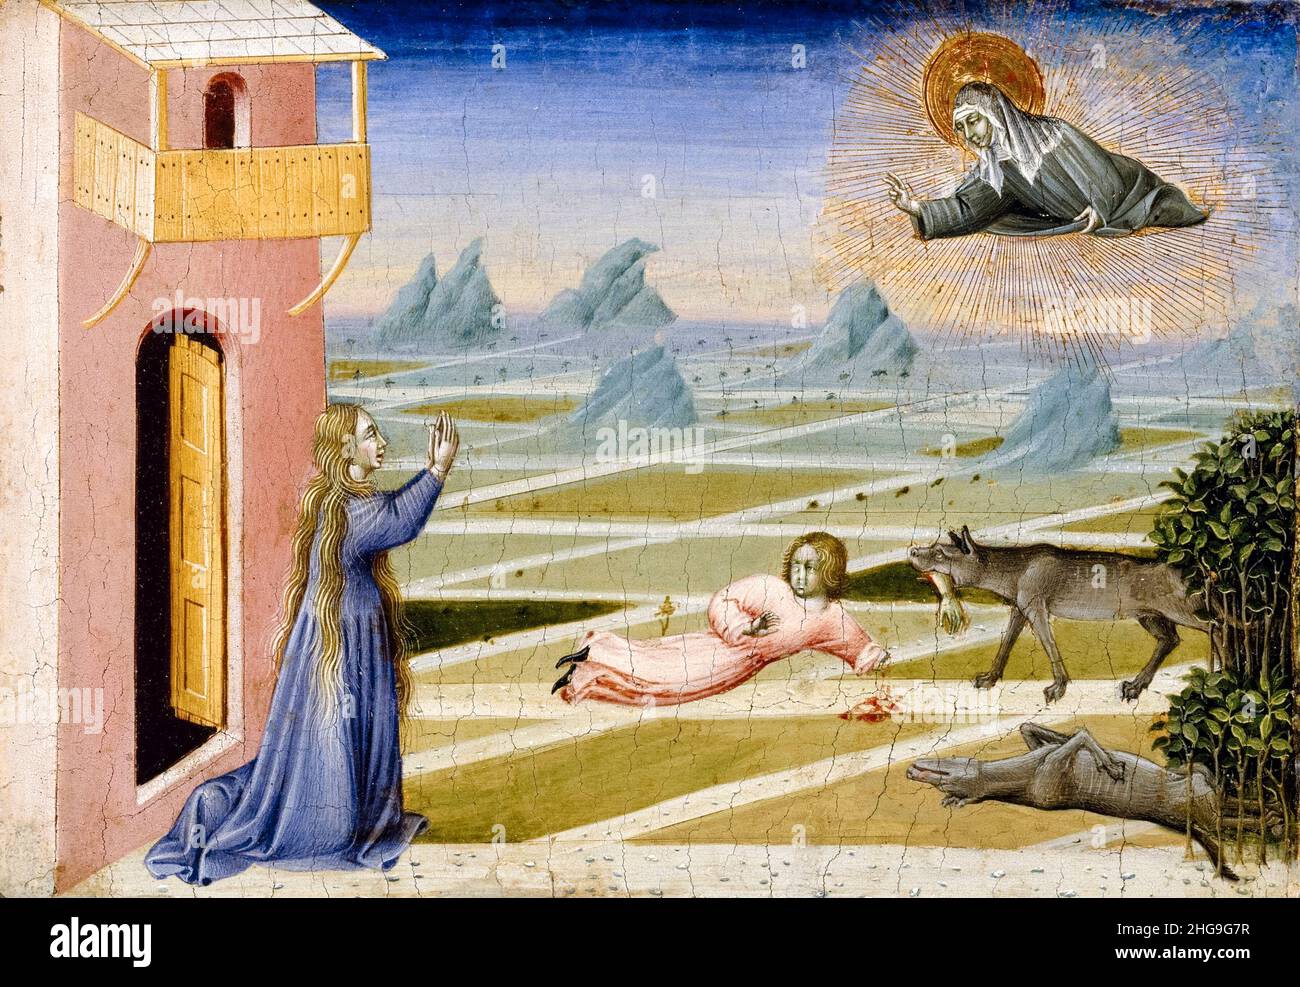 Saint Clare rescuing a Child mauled by a Wolf, 15th Century painting by Giovanni di Paolo, 1455-1460 Stock Photo